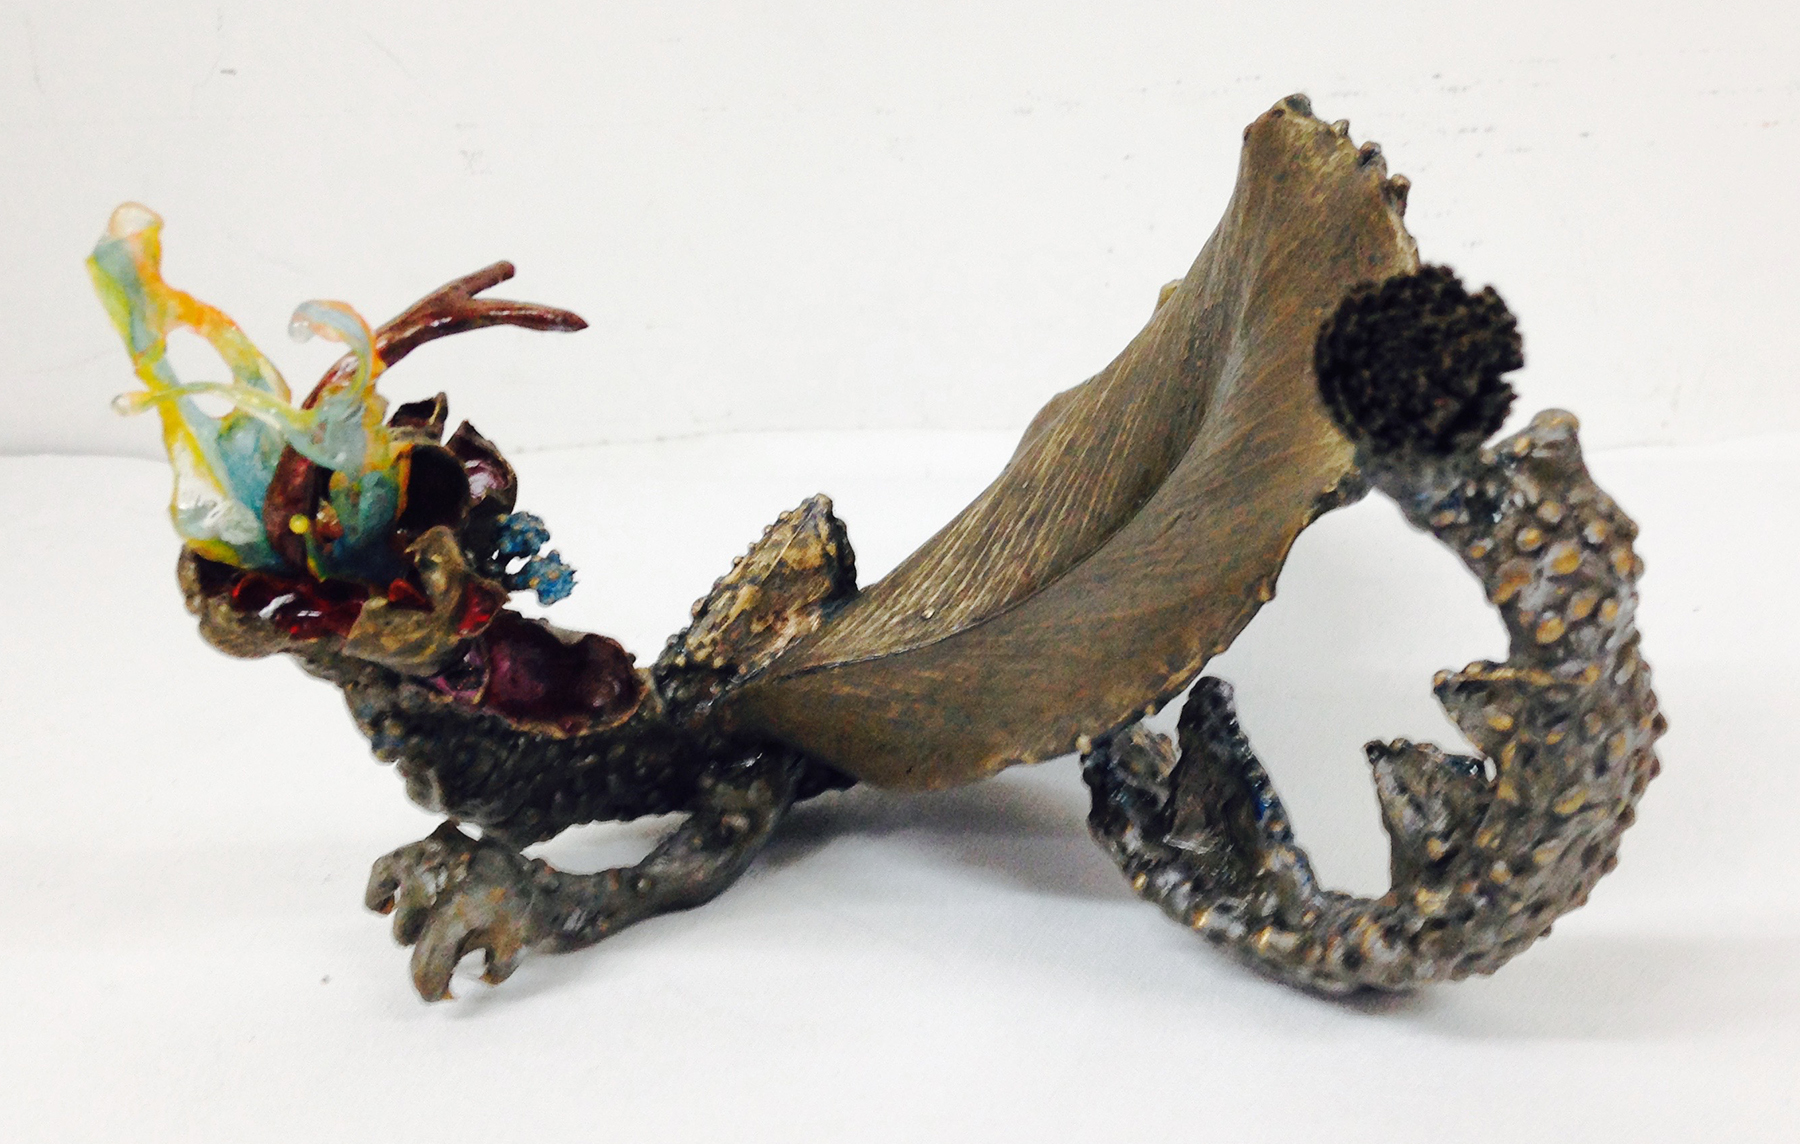  “Fairy Dragon" (Other View) Free standing Bronze sculpture with mixed media. H 4.5" x W 11.5" x L 7" $5,000.00    